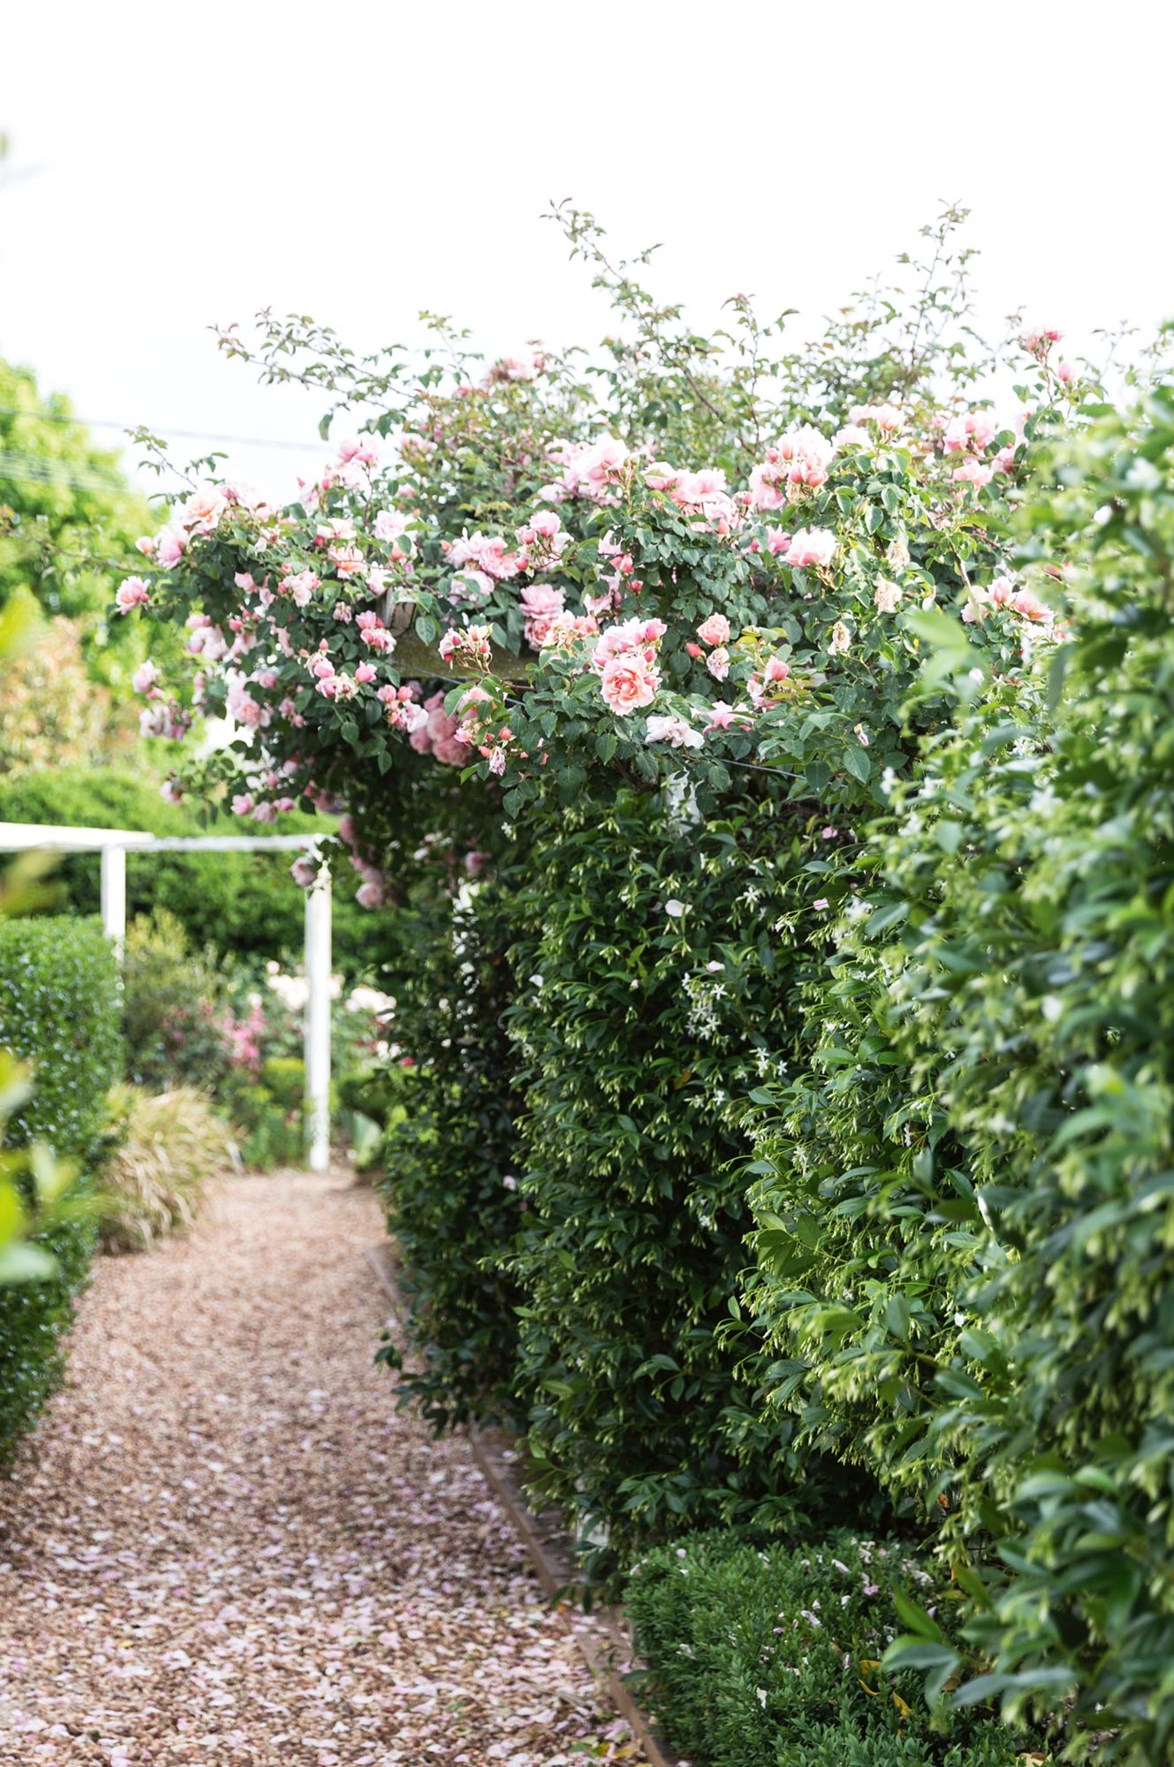 Swathes of blushing pink compliment the hedging and greenery at this [magnificent garden in Queensland](https://www.homestolove.com.au/magnificent-qld-garden-abloom-with-wisteria-and-rambling-roses-13978|target="_blank") where owner Amelia Wilshire cultivated her green thumb.